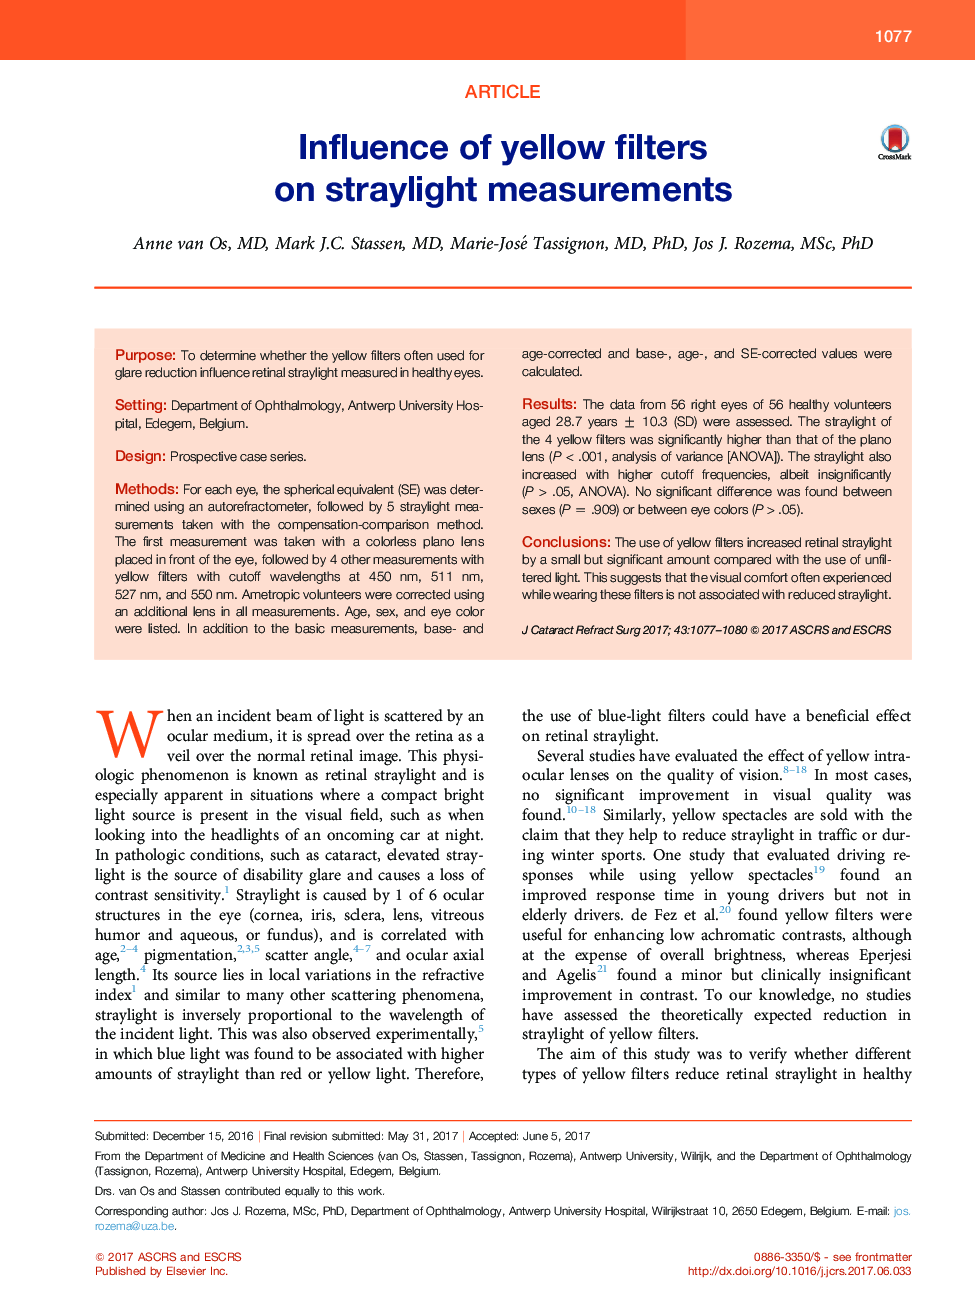 Influence of yellow filters on straylight measurements